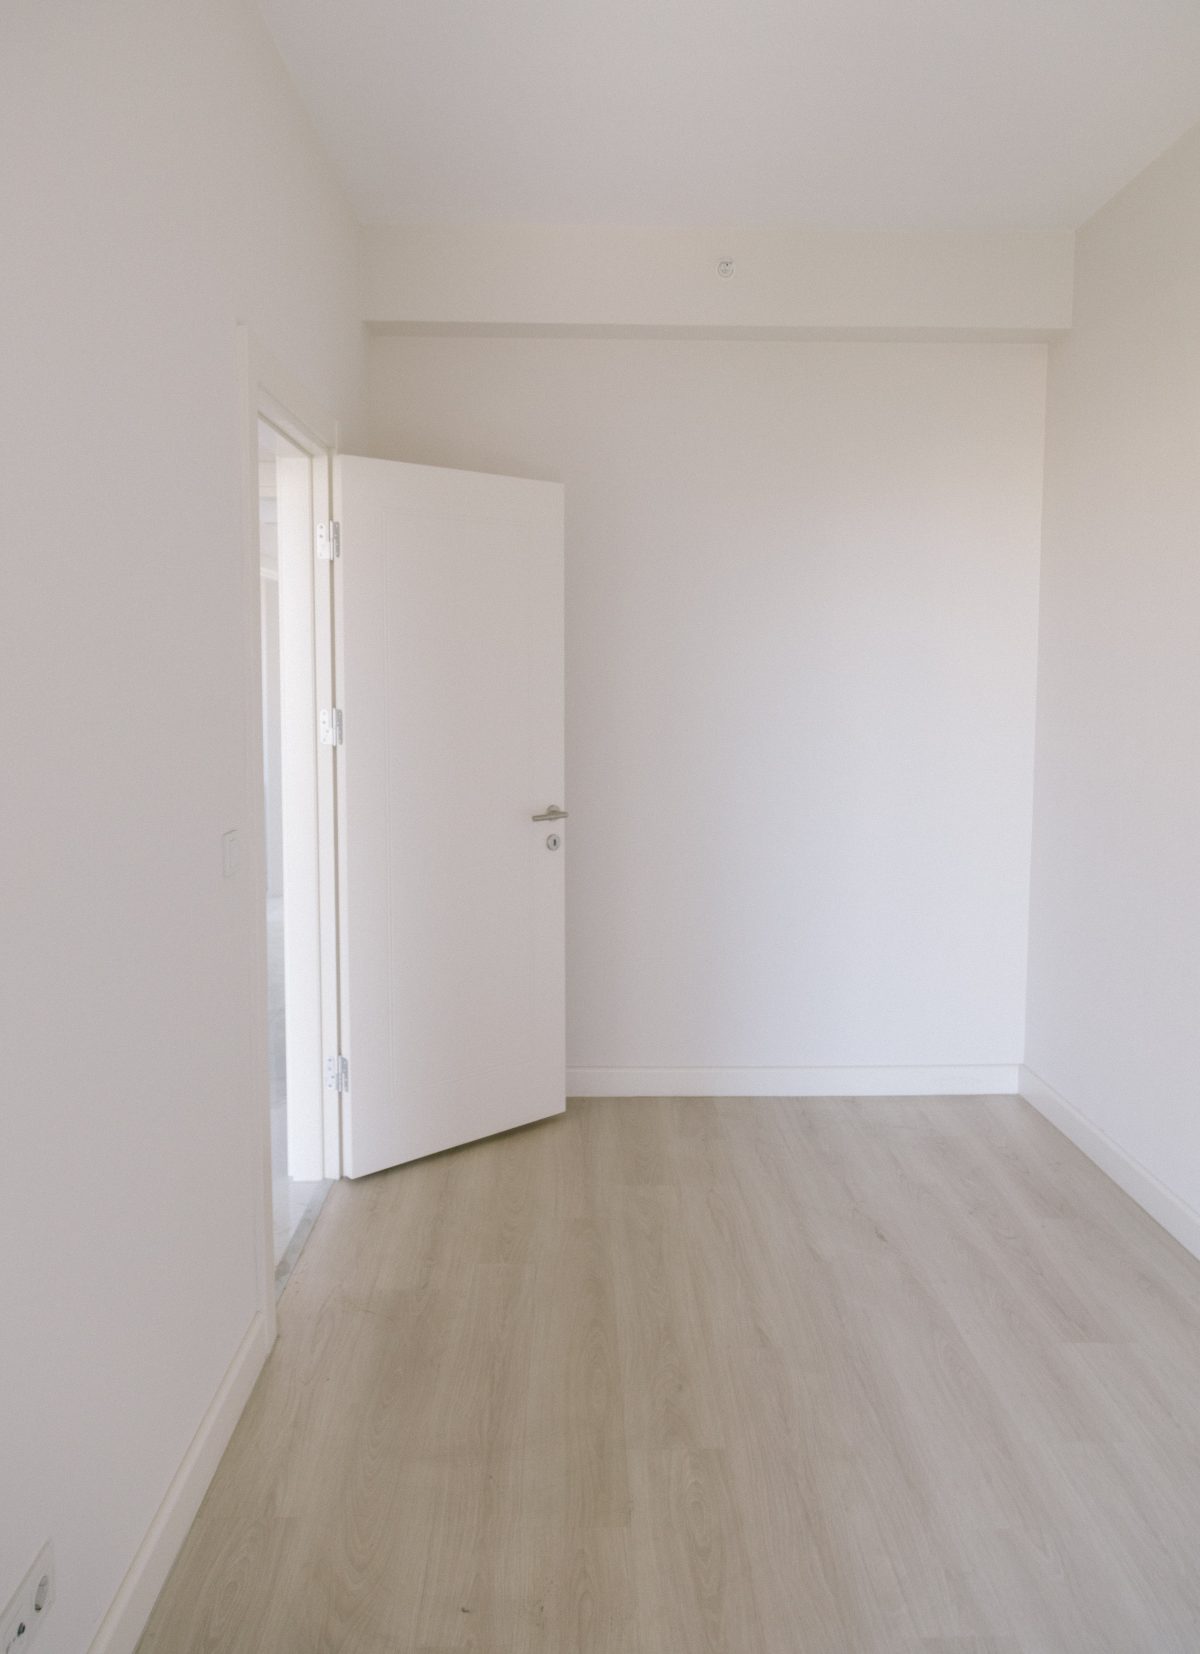 Location appartement neuf